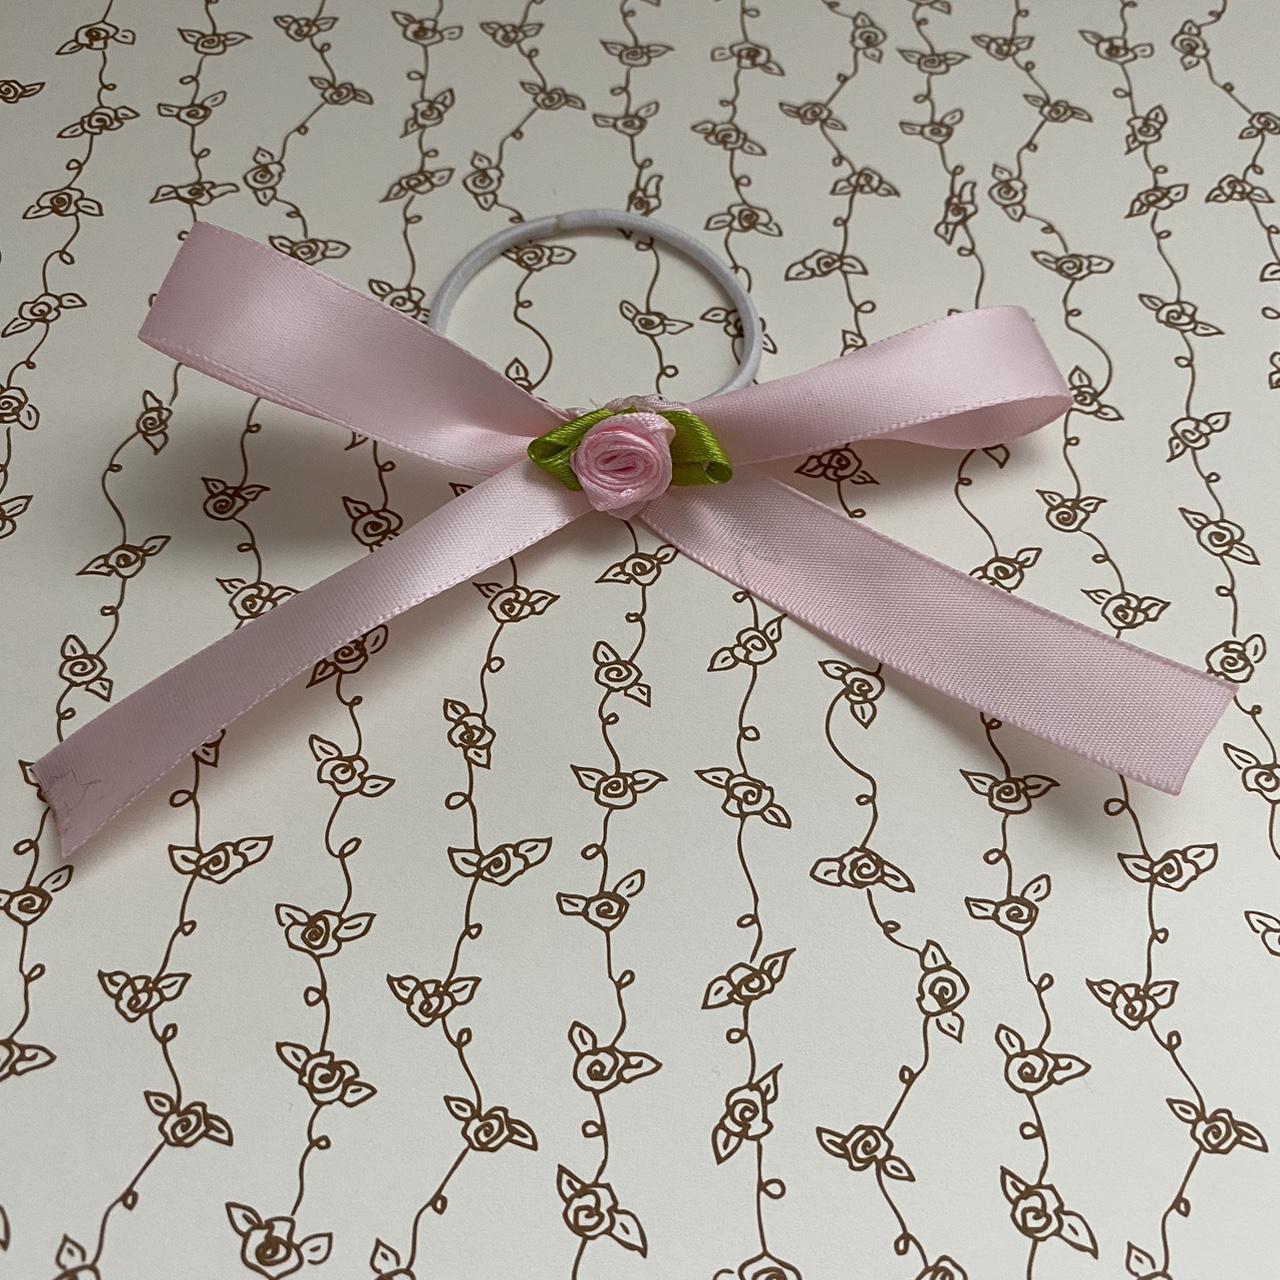 Women's White and Pink Hair-accessories (2)